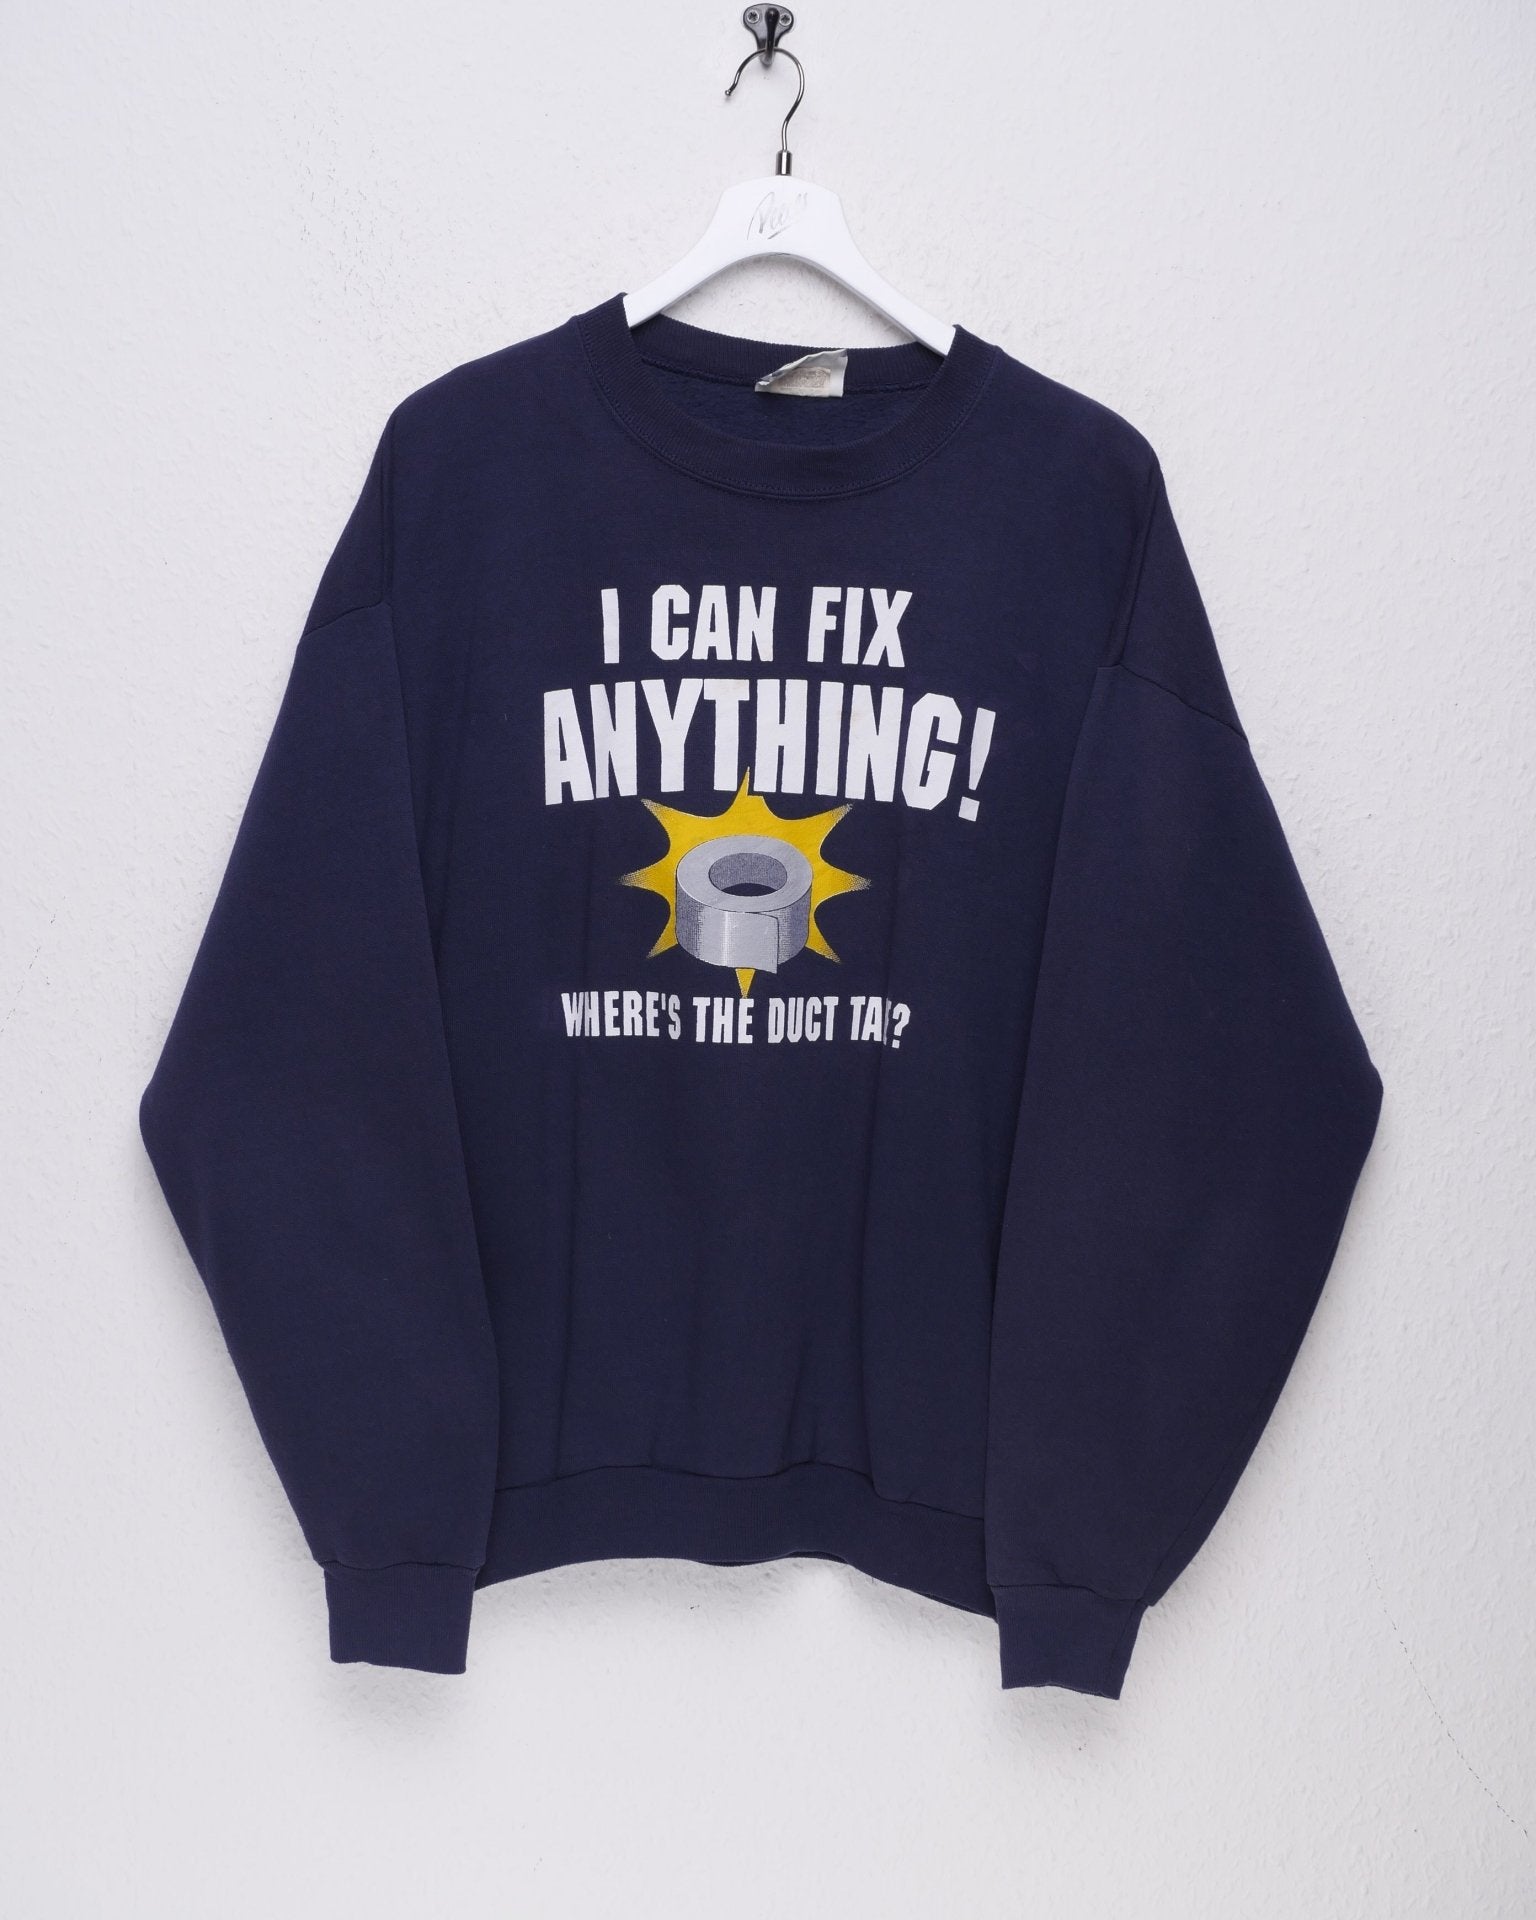 Lee 'I Can Fix Anything' printed Graphic navy Sweater - Peeces